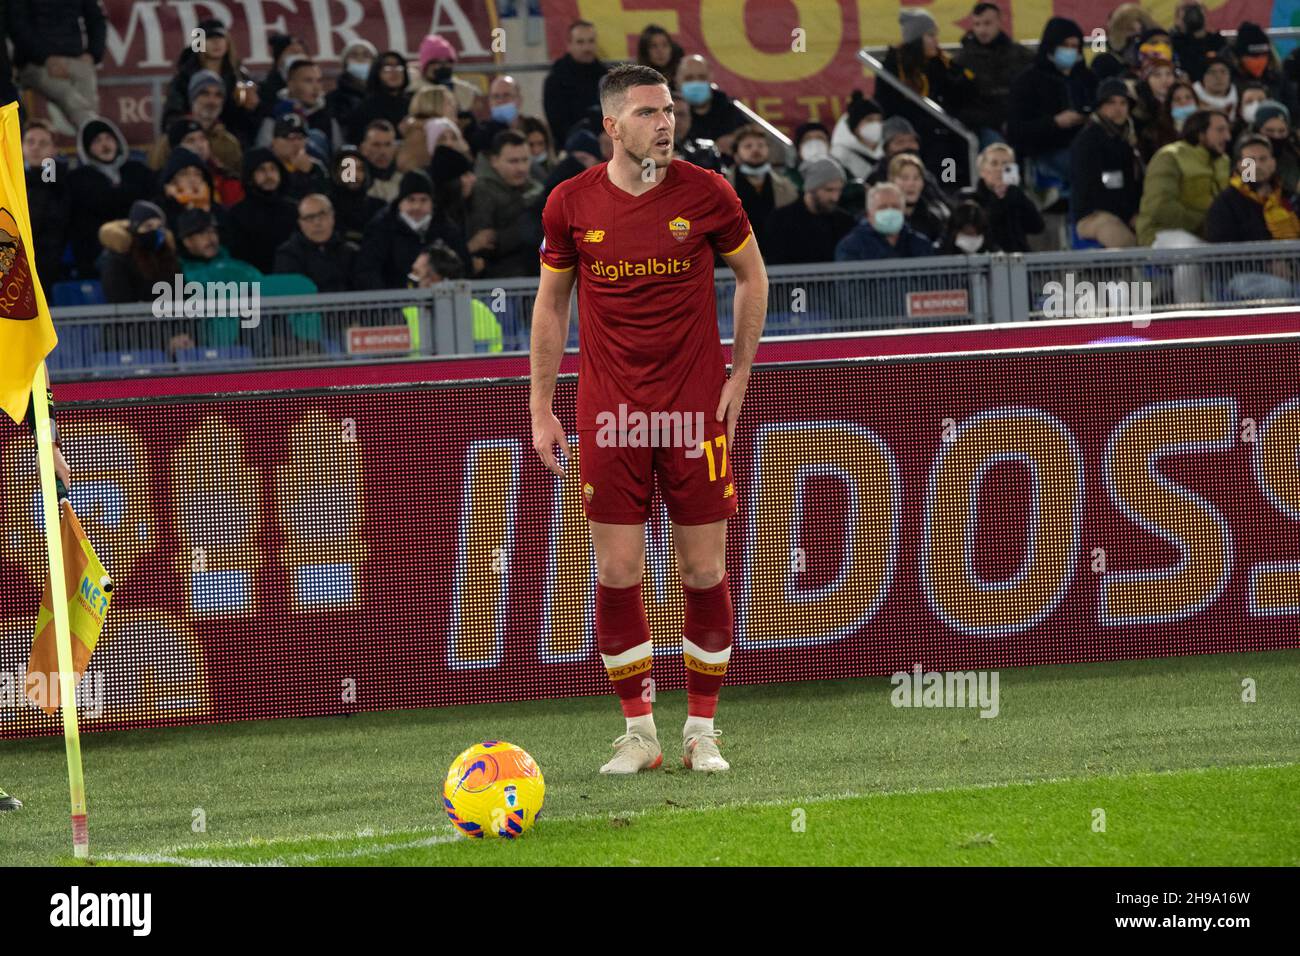 Rome, Italy. 4th December, 2021. Jordan Veretout of AS Roma in action during the Serie A football championship between AS Roma and Fc Inter at the Olympic Stadium. Credit: Cosimo Martemucci / Alamy Live News Stock Photo